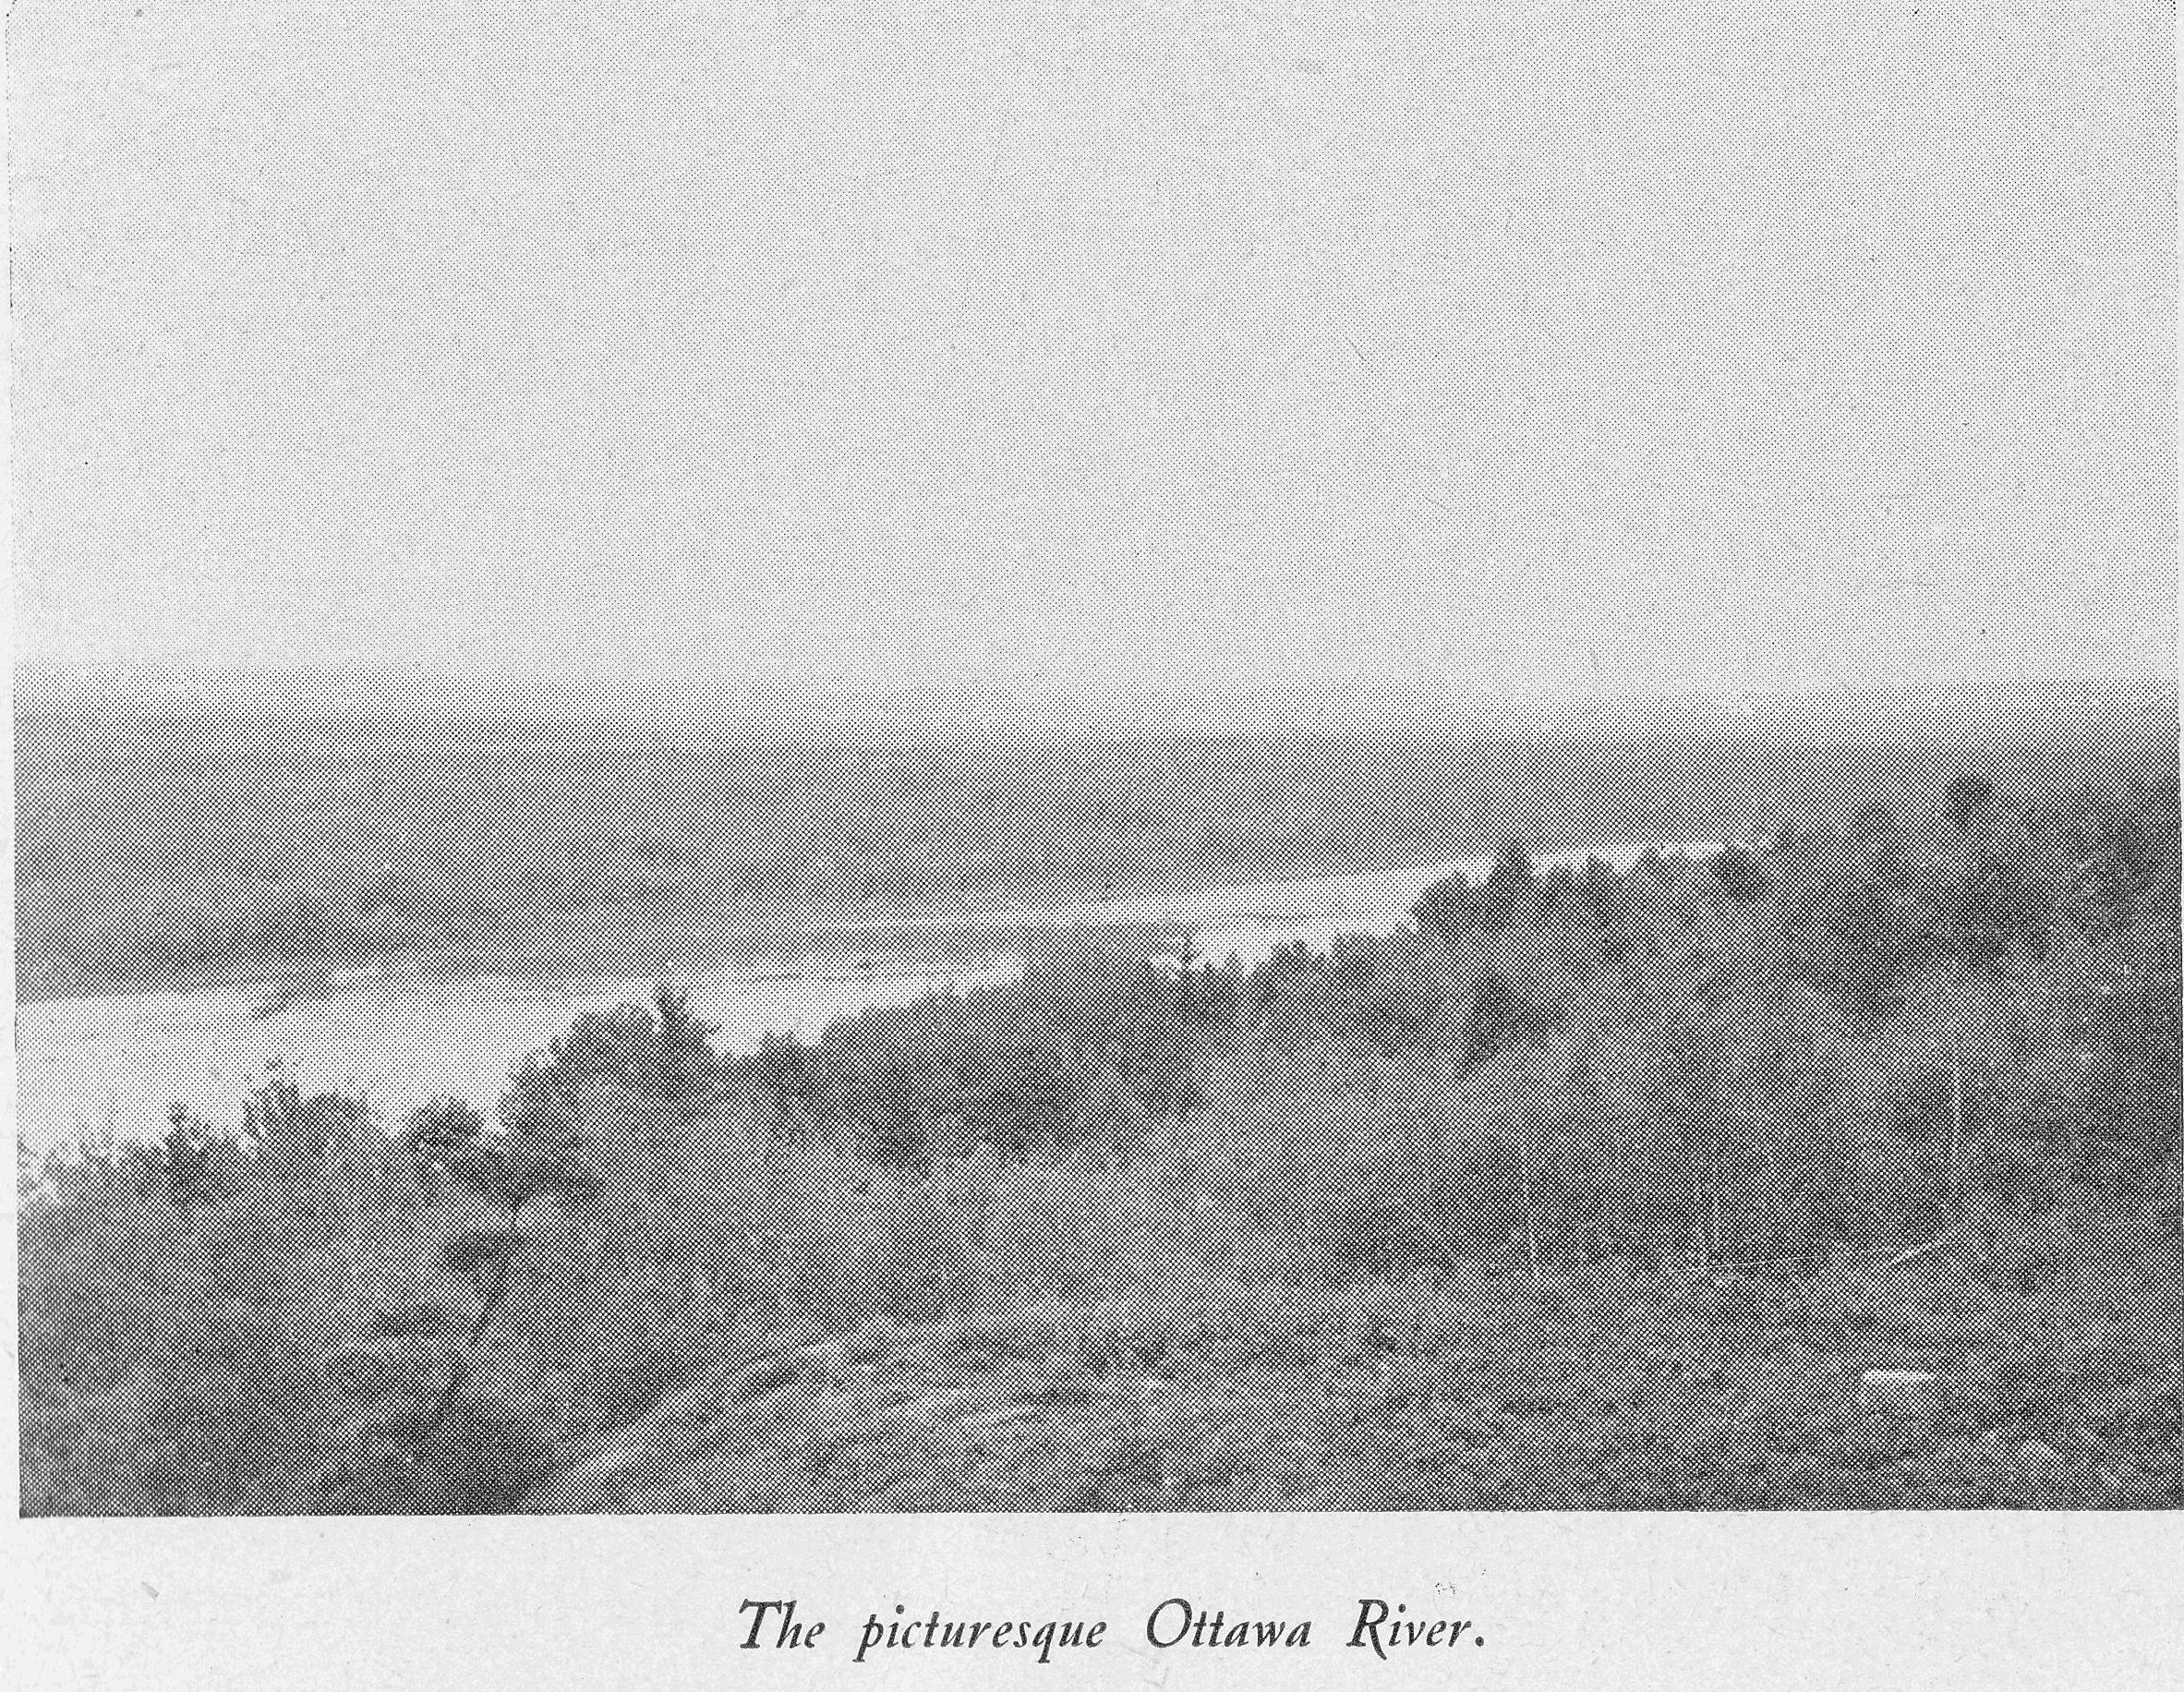 landscape view of the picturesque Ottawa River